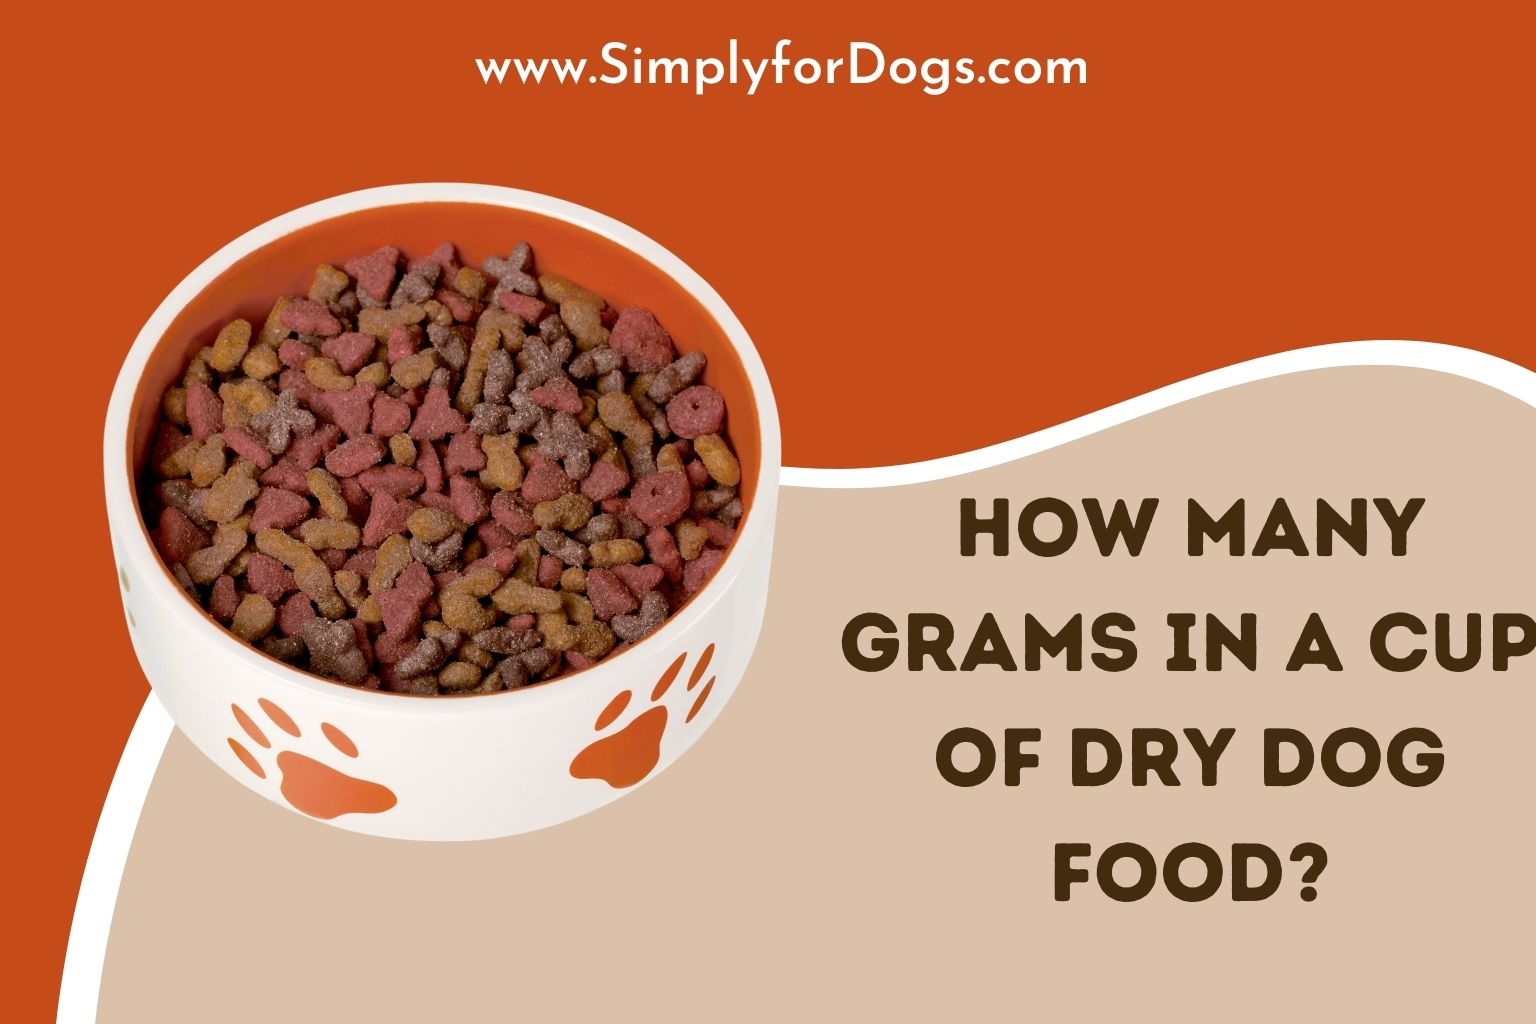 How Many Grams in a Cup of Dry Dog Food? (Healthy Tips) - Simply For Dogs